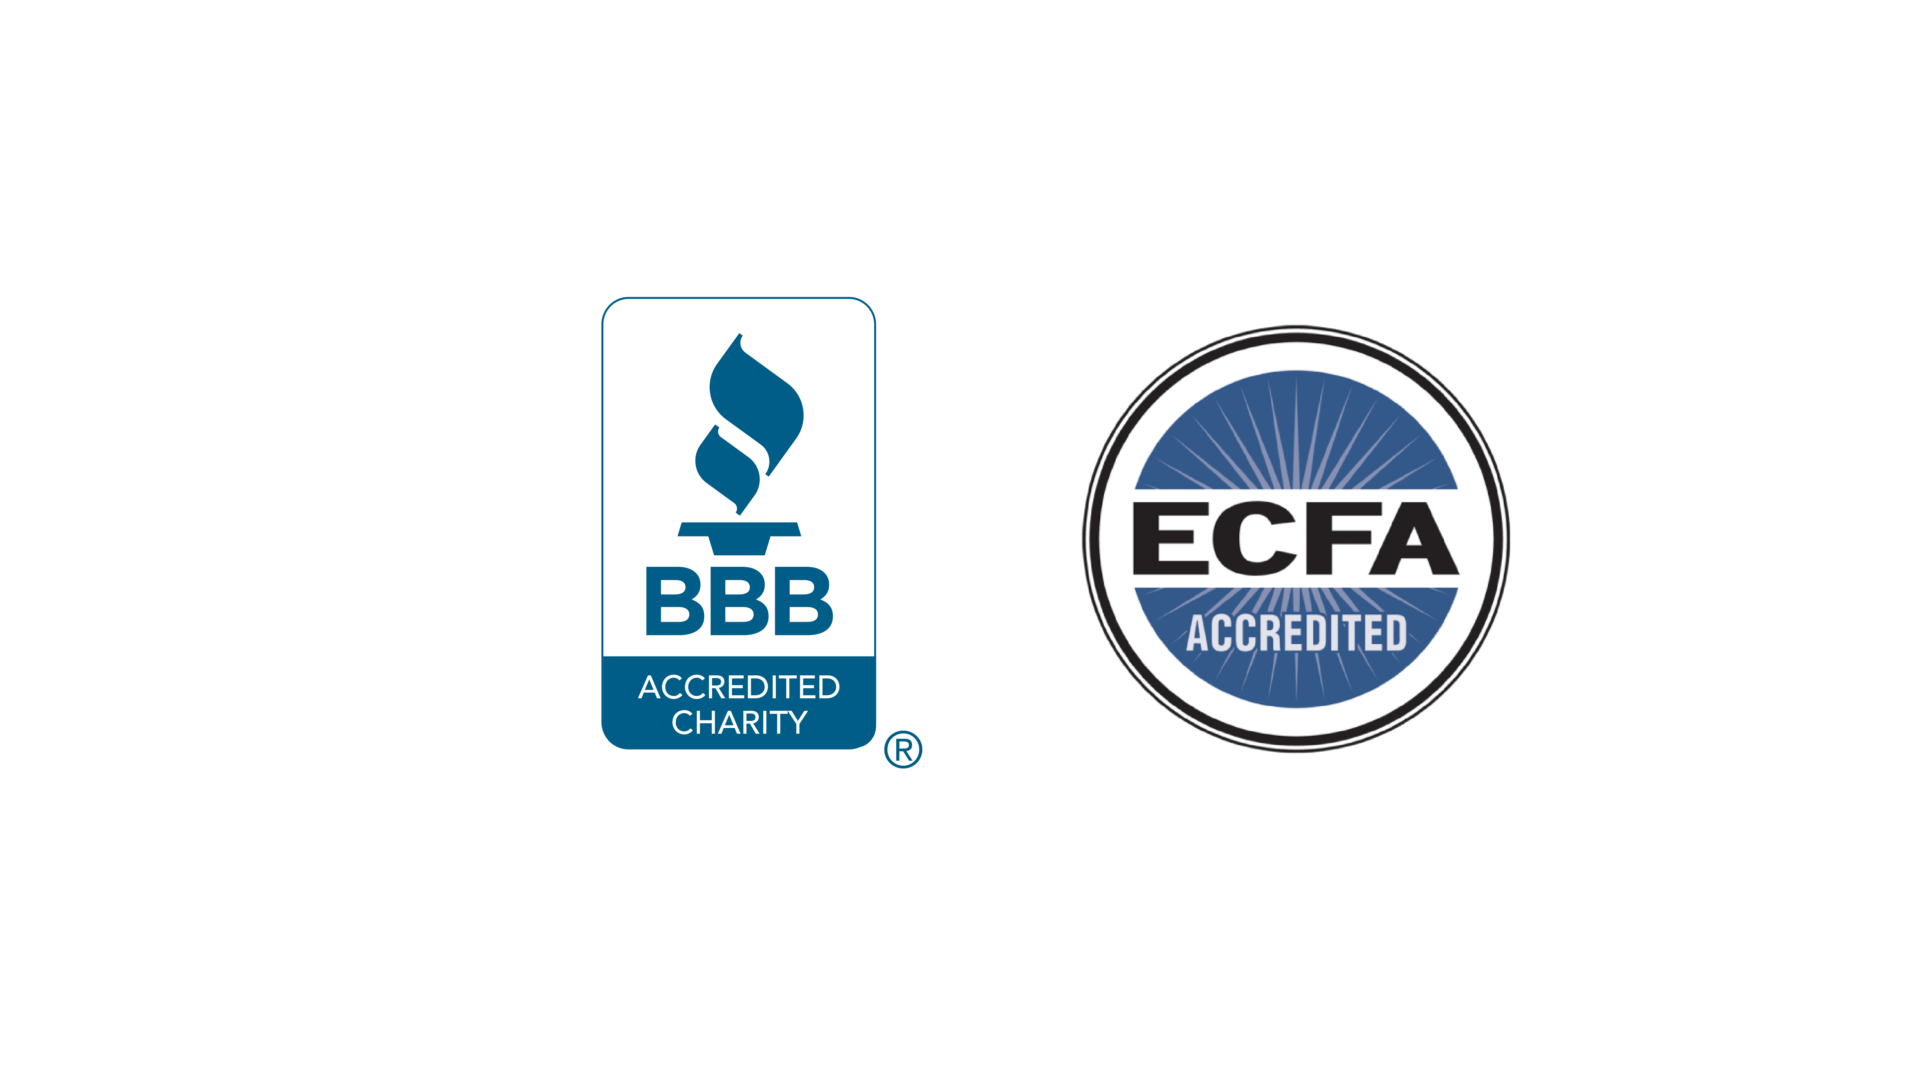 ECFA and BBB accredited logos